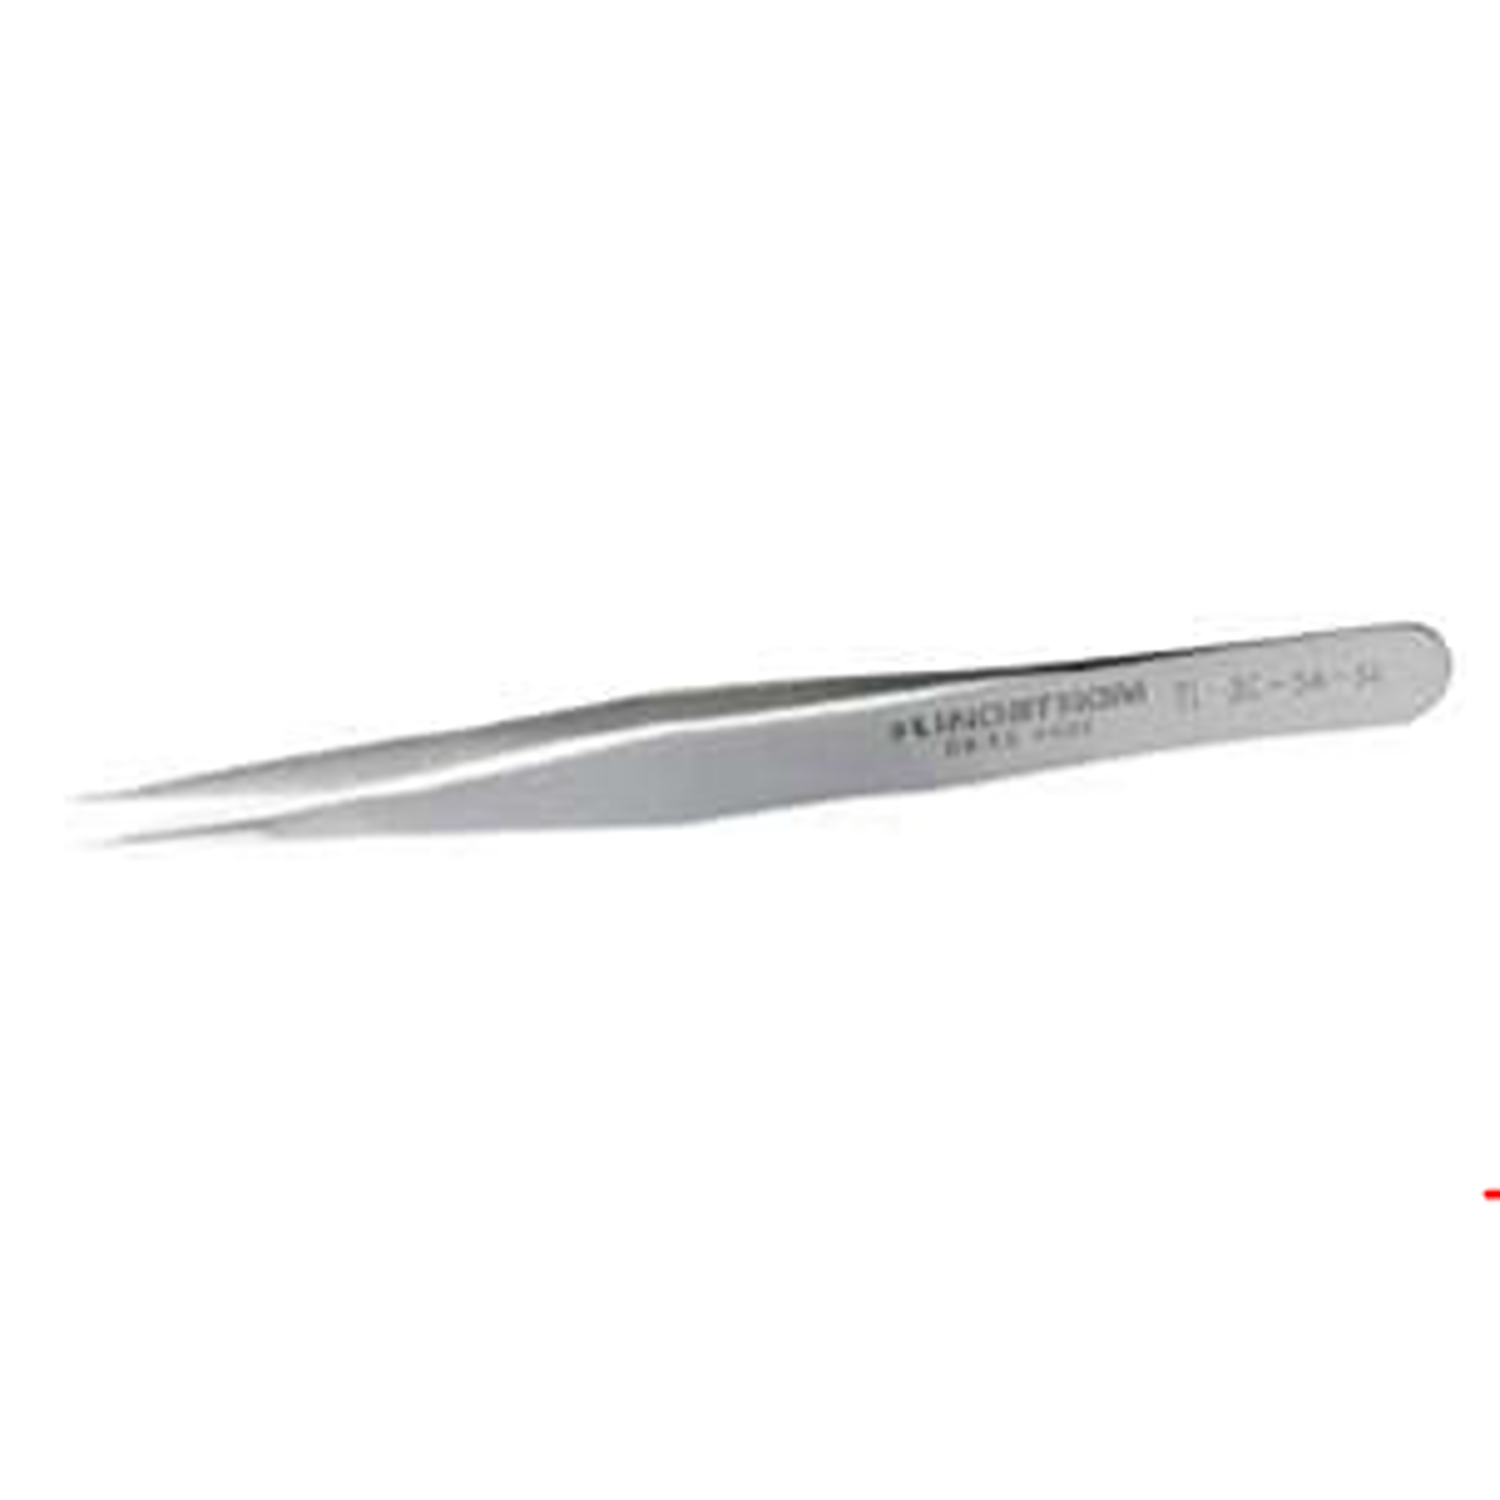 BAHCO TL 3C-SA-SL Stainless Steel Precision Industrial Tweezers - Premium Tweezers from BAHCO - Shop now at Yew Aik.